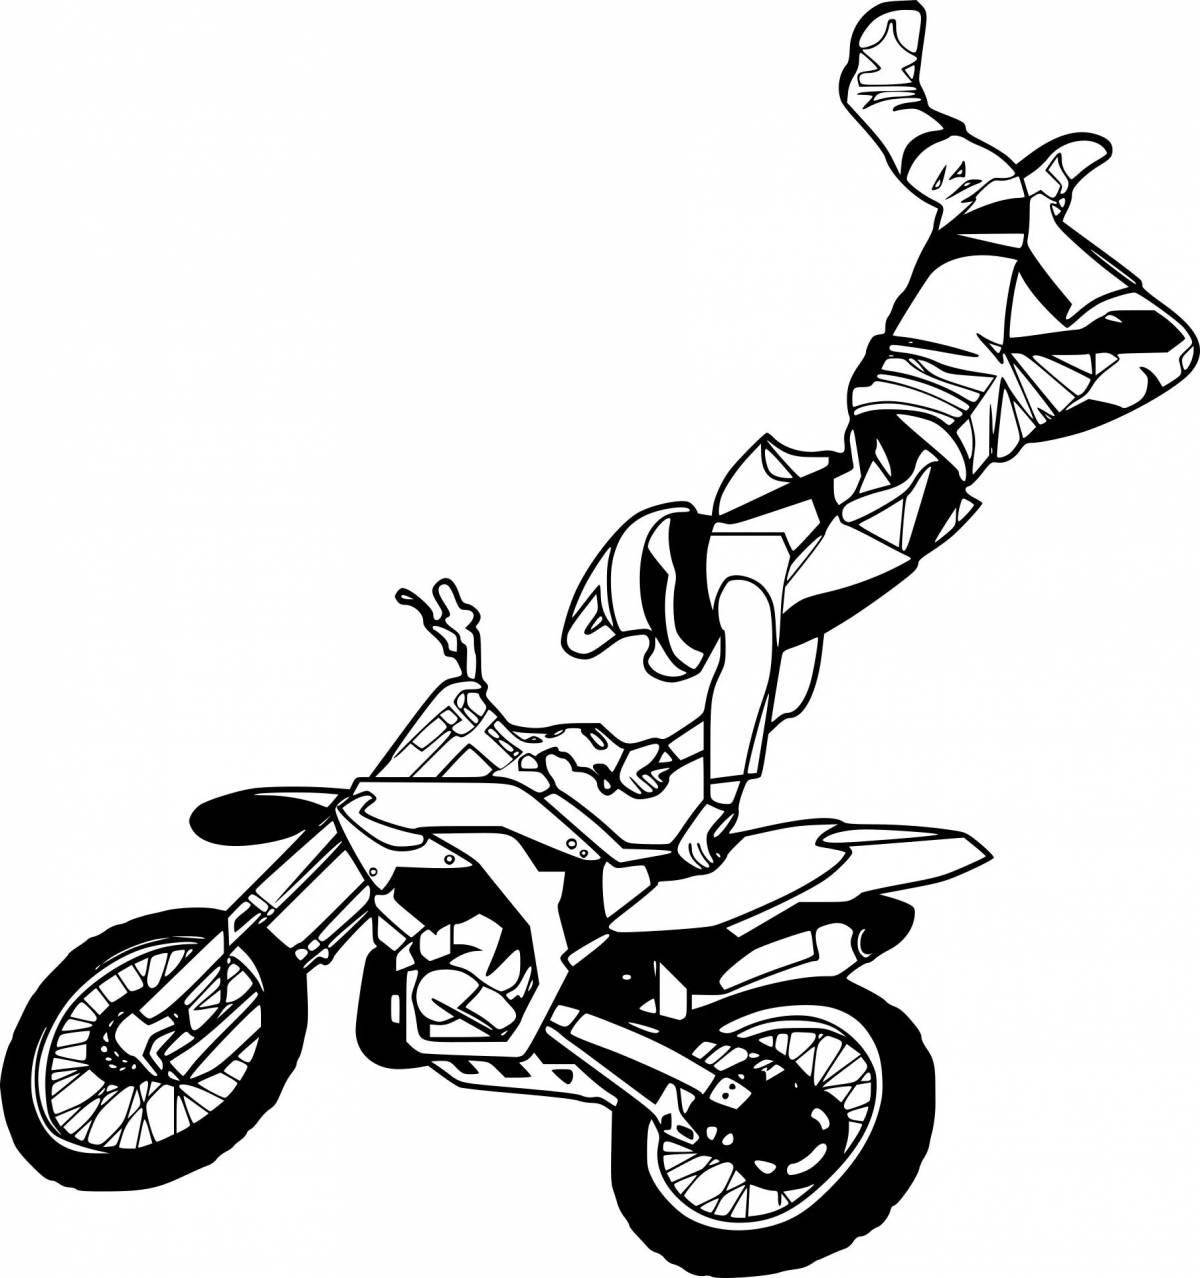 Saucy Spiderman on a motorcycle